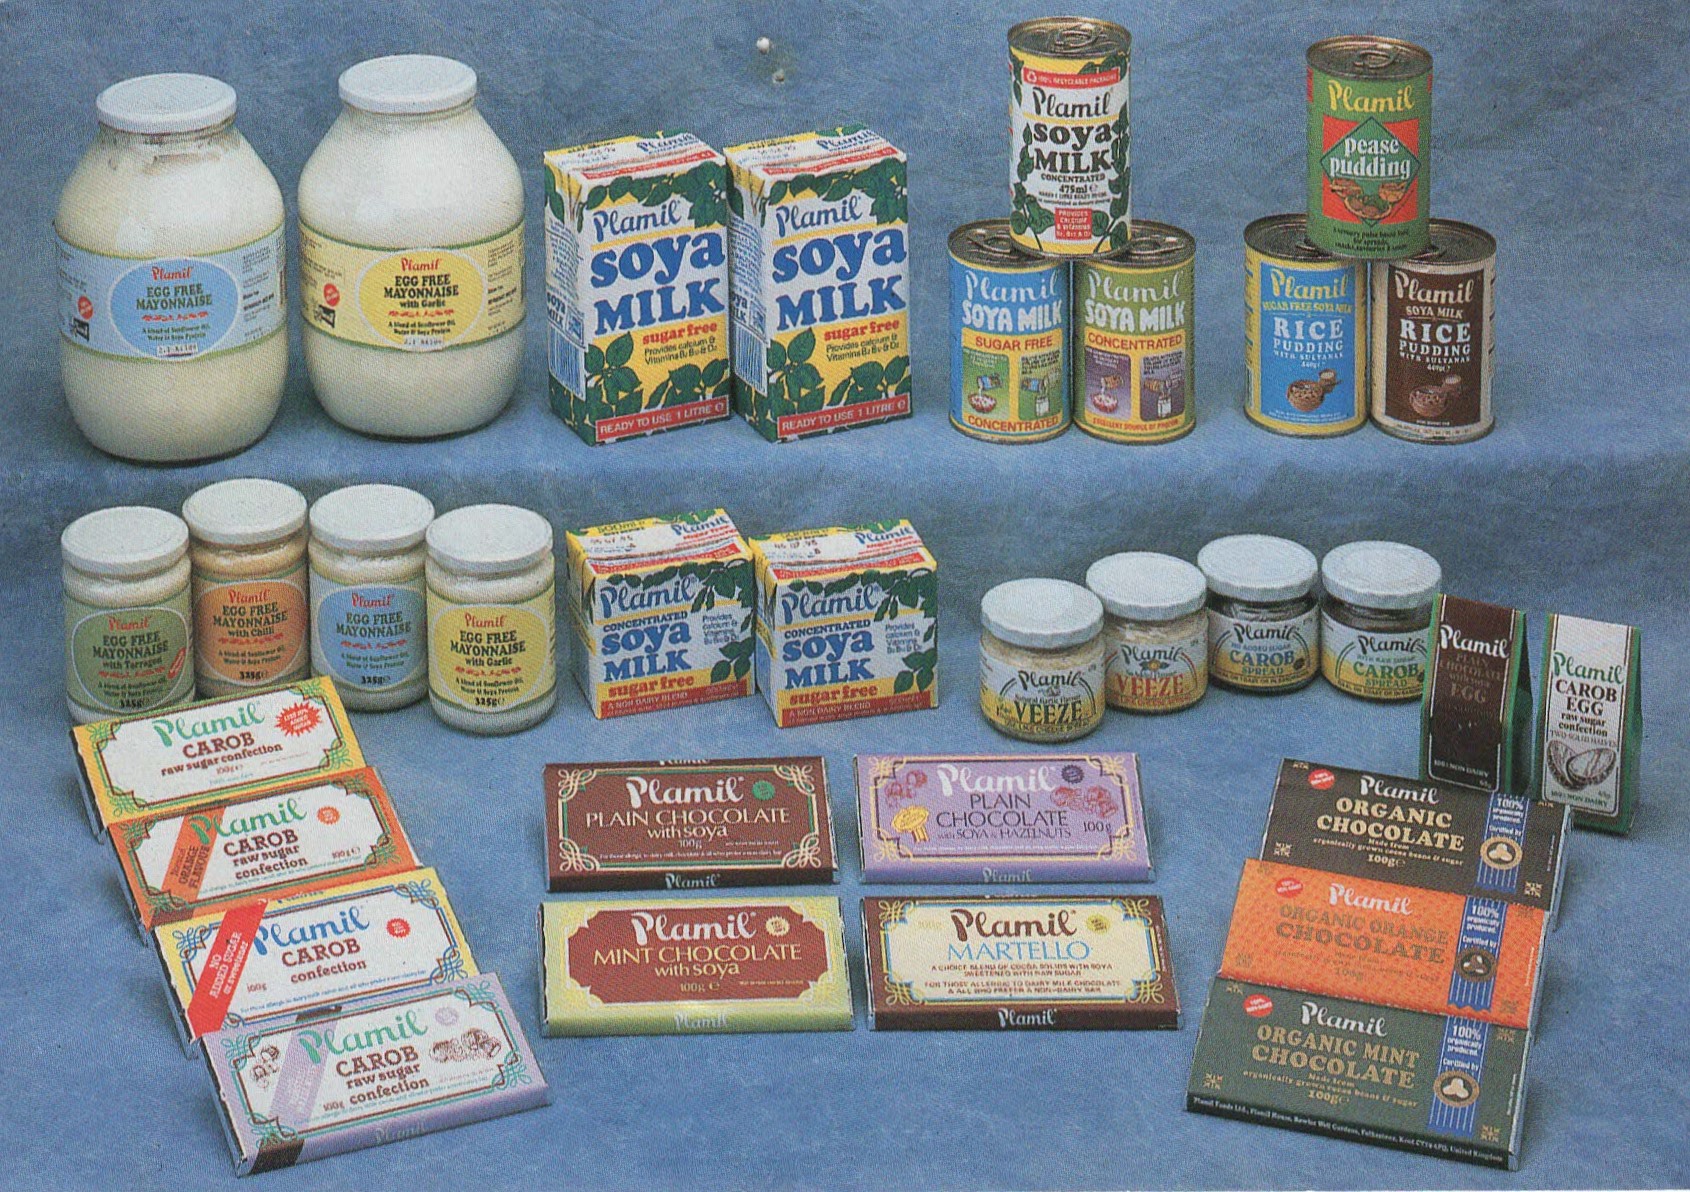 Plamil's range from the 1980s